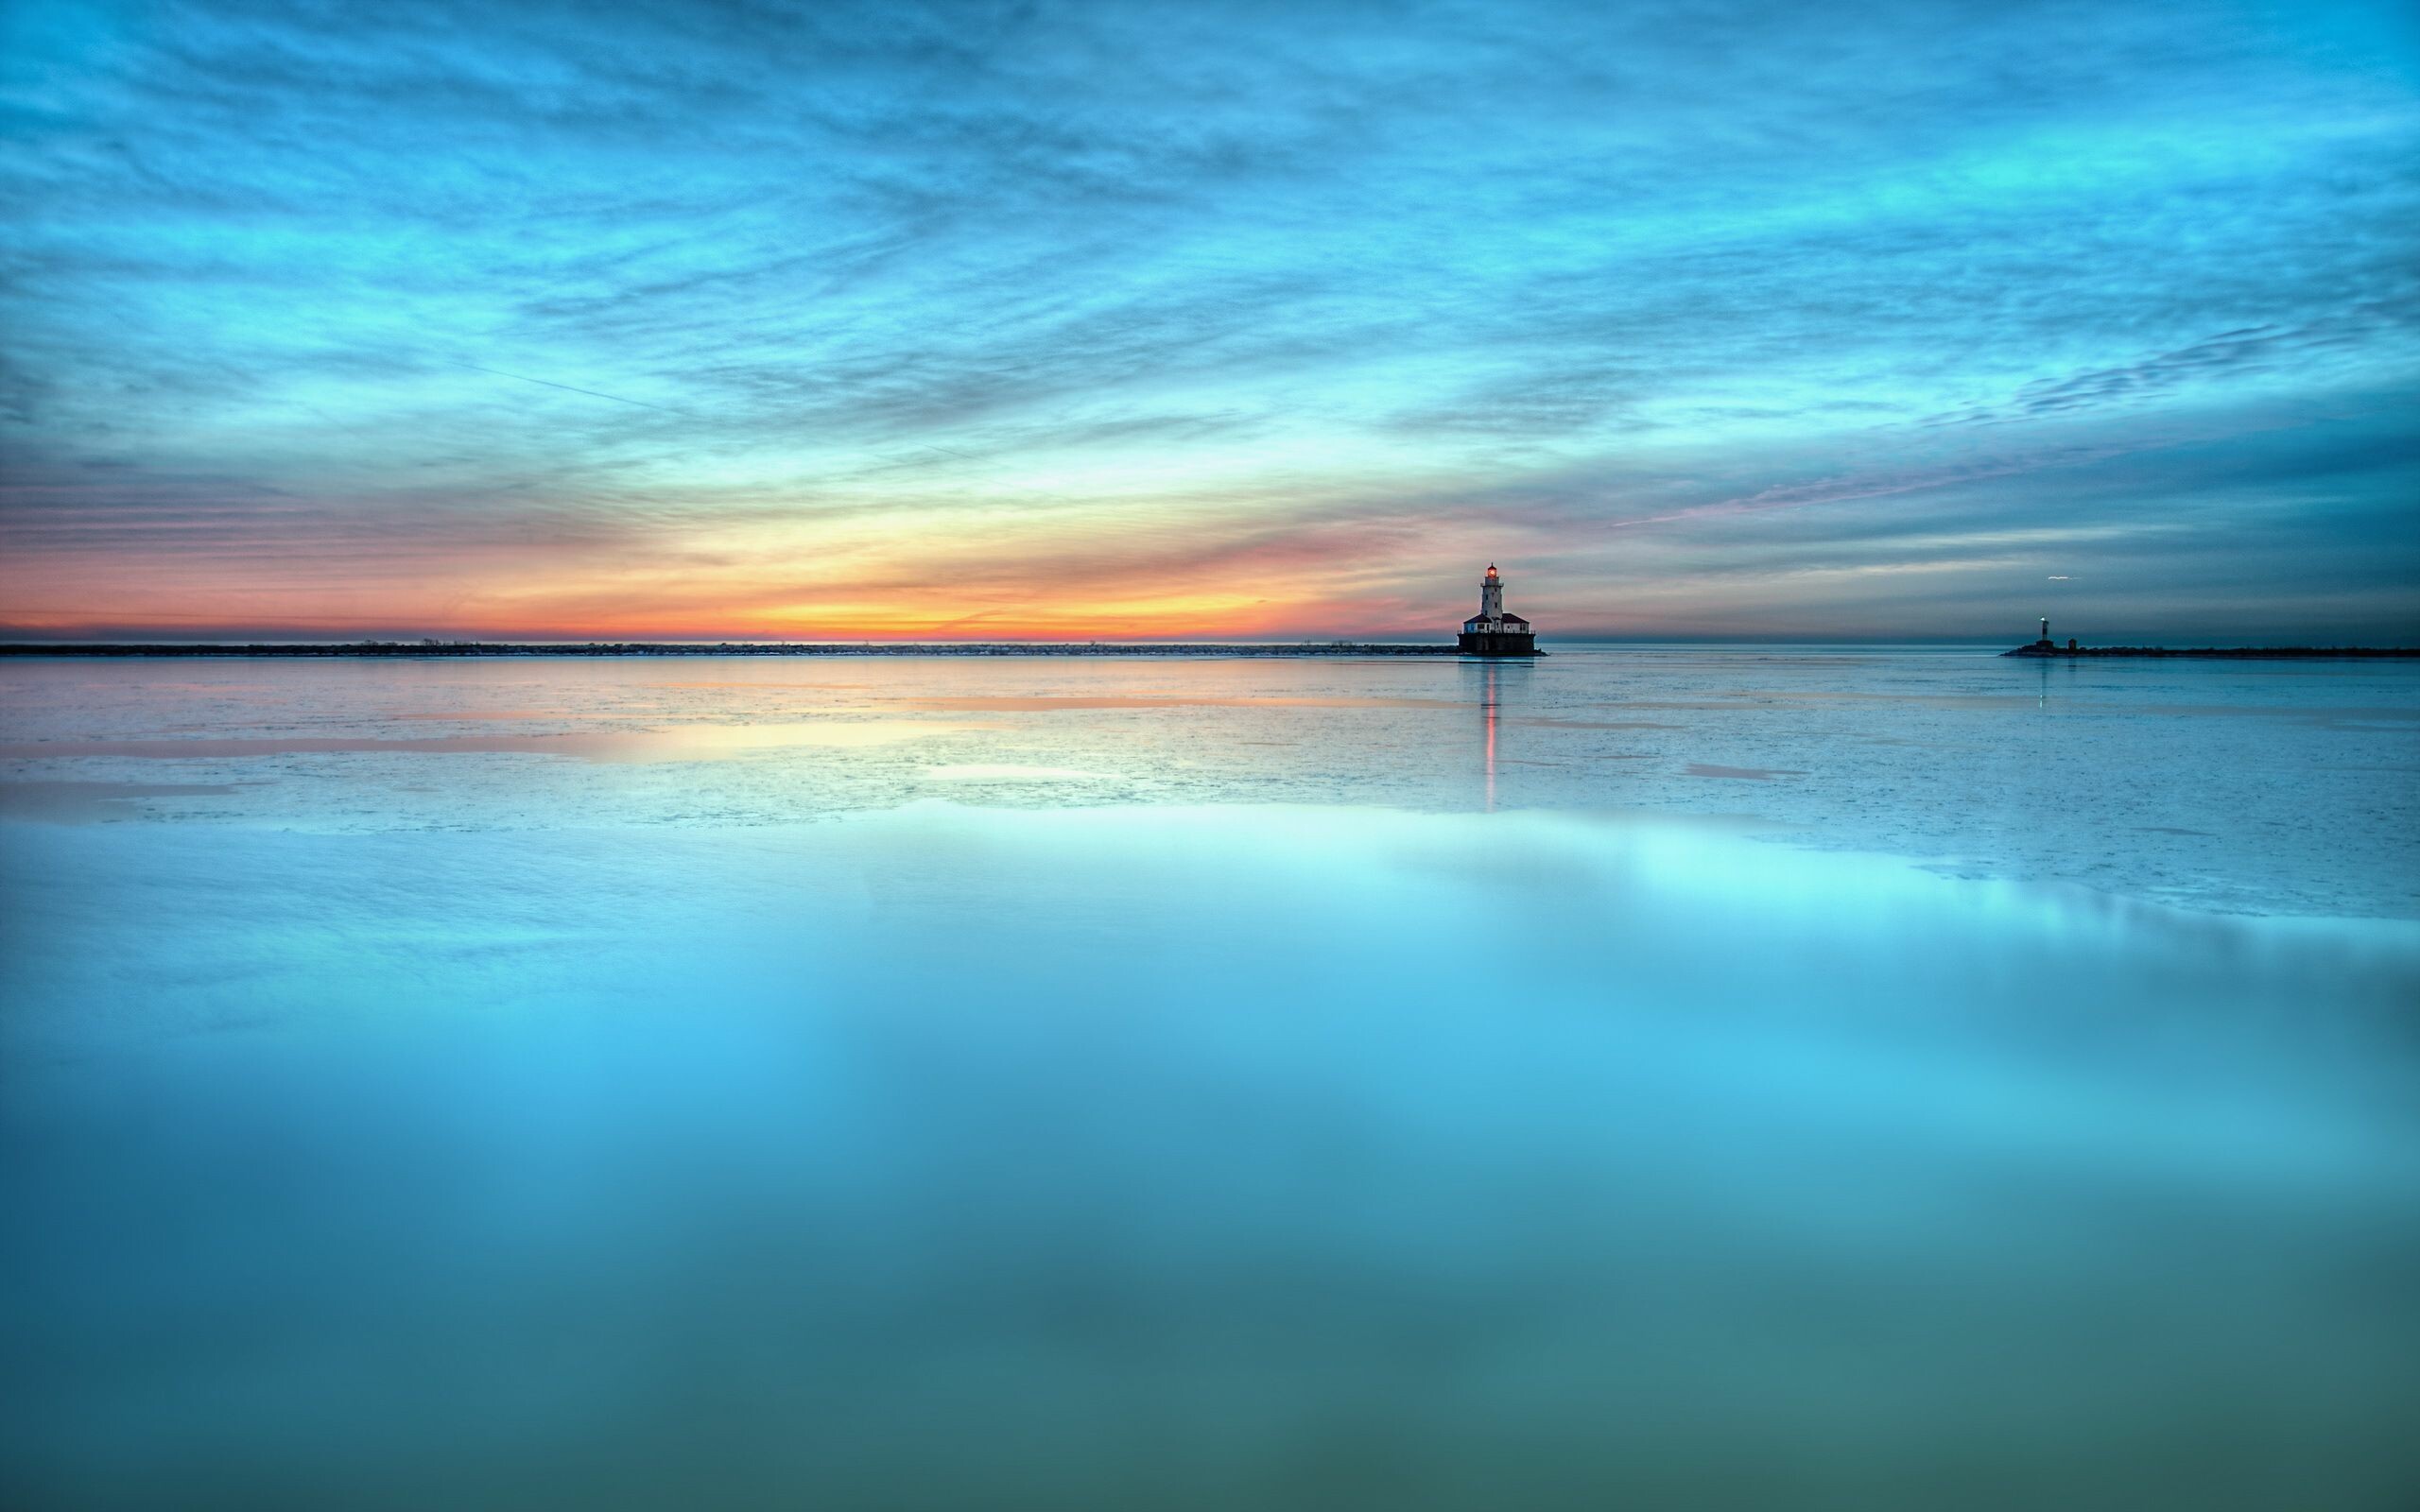 Sunrise: First light, Daybreak, The broad expanse of water reflecting clouds. 2560x1600 HD Wallpaper.